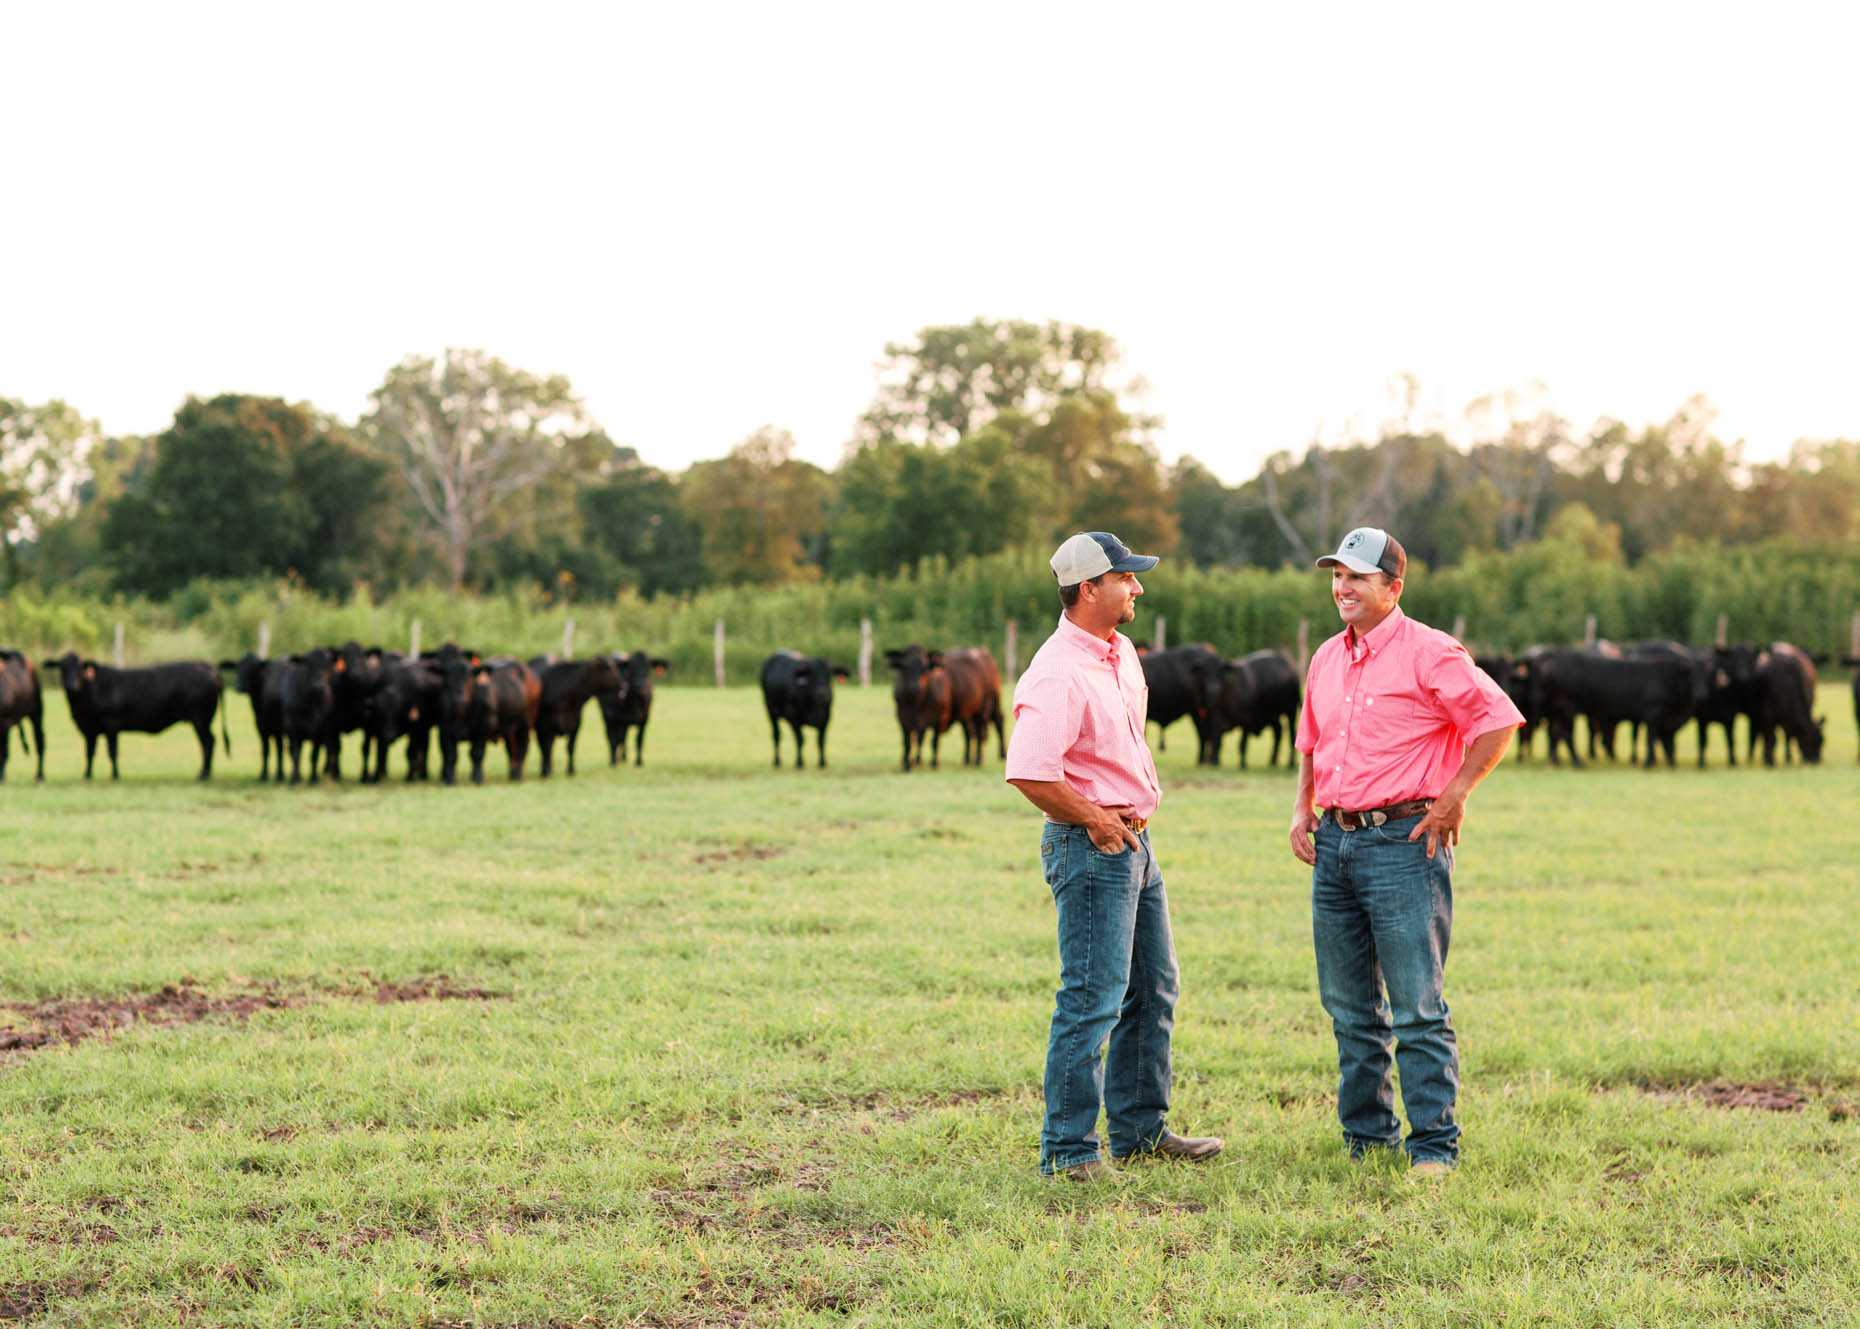 Texas cattlemen standing in field with cows